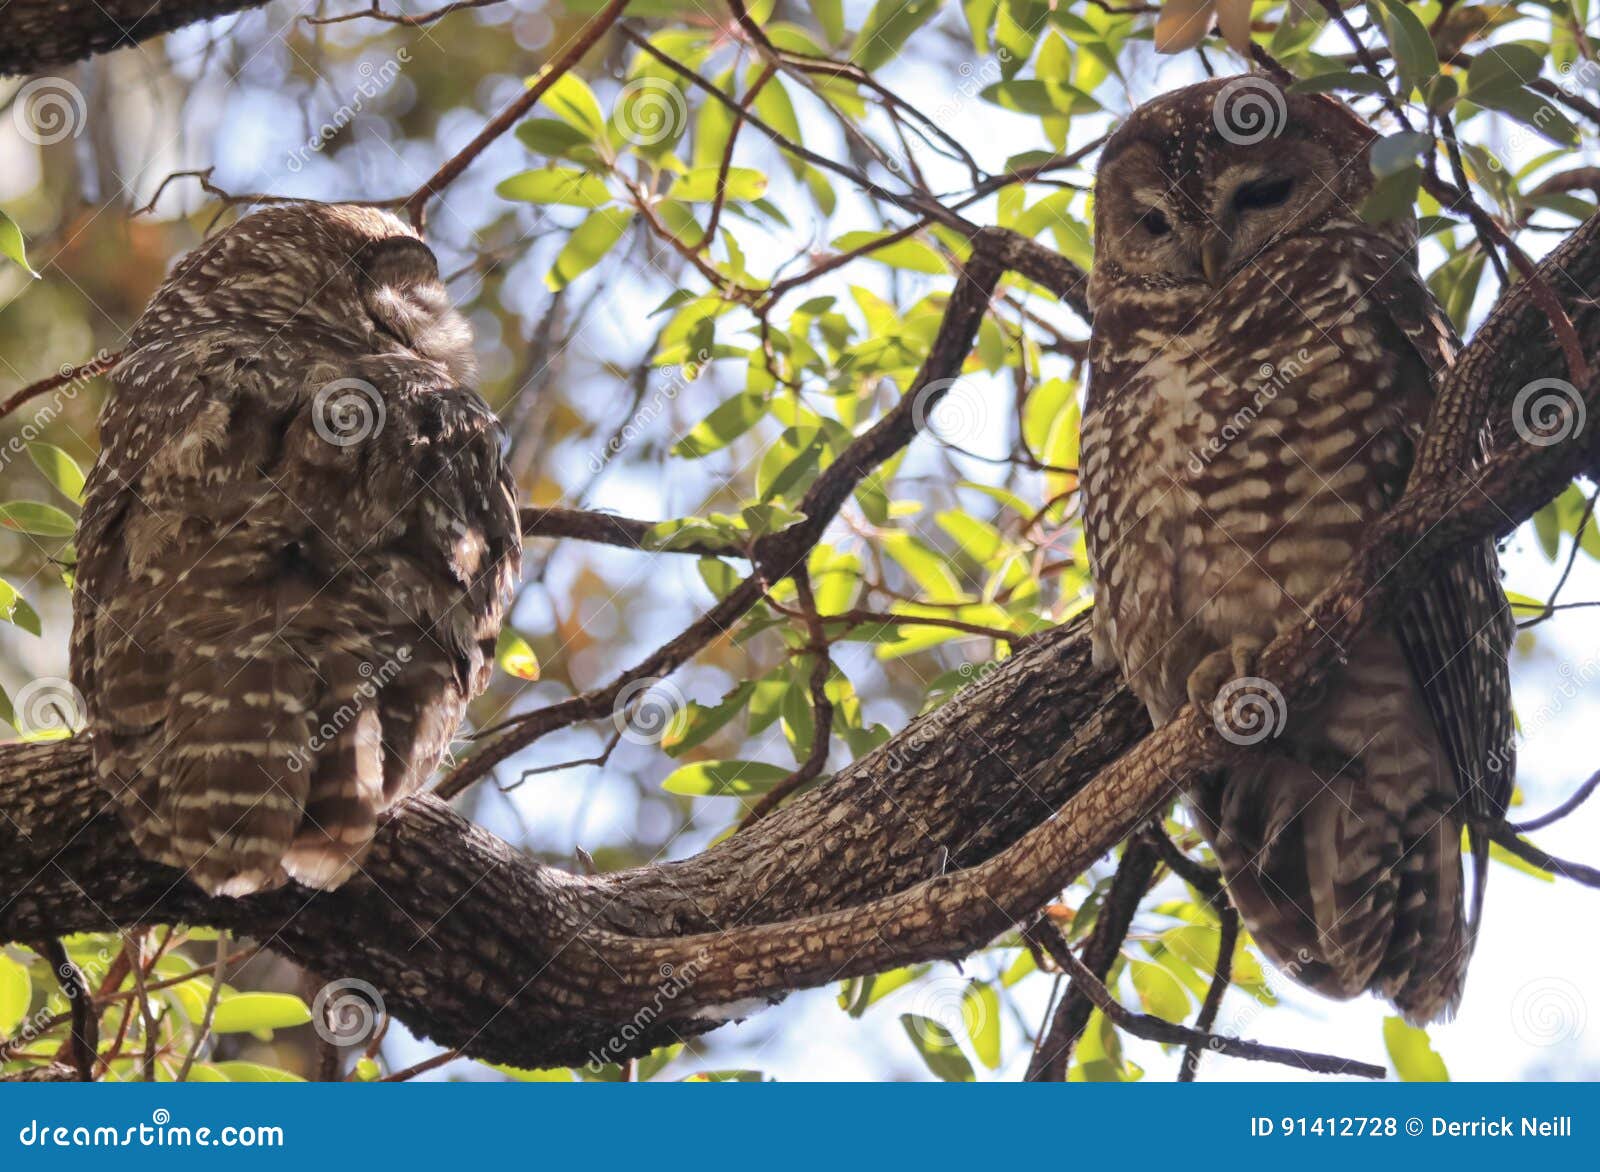 a breeding pair of mexican spotted owls